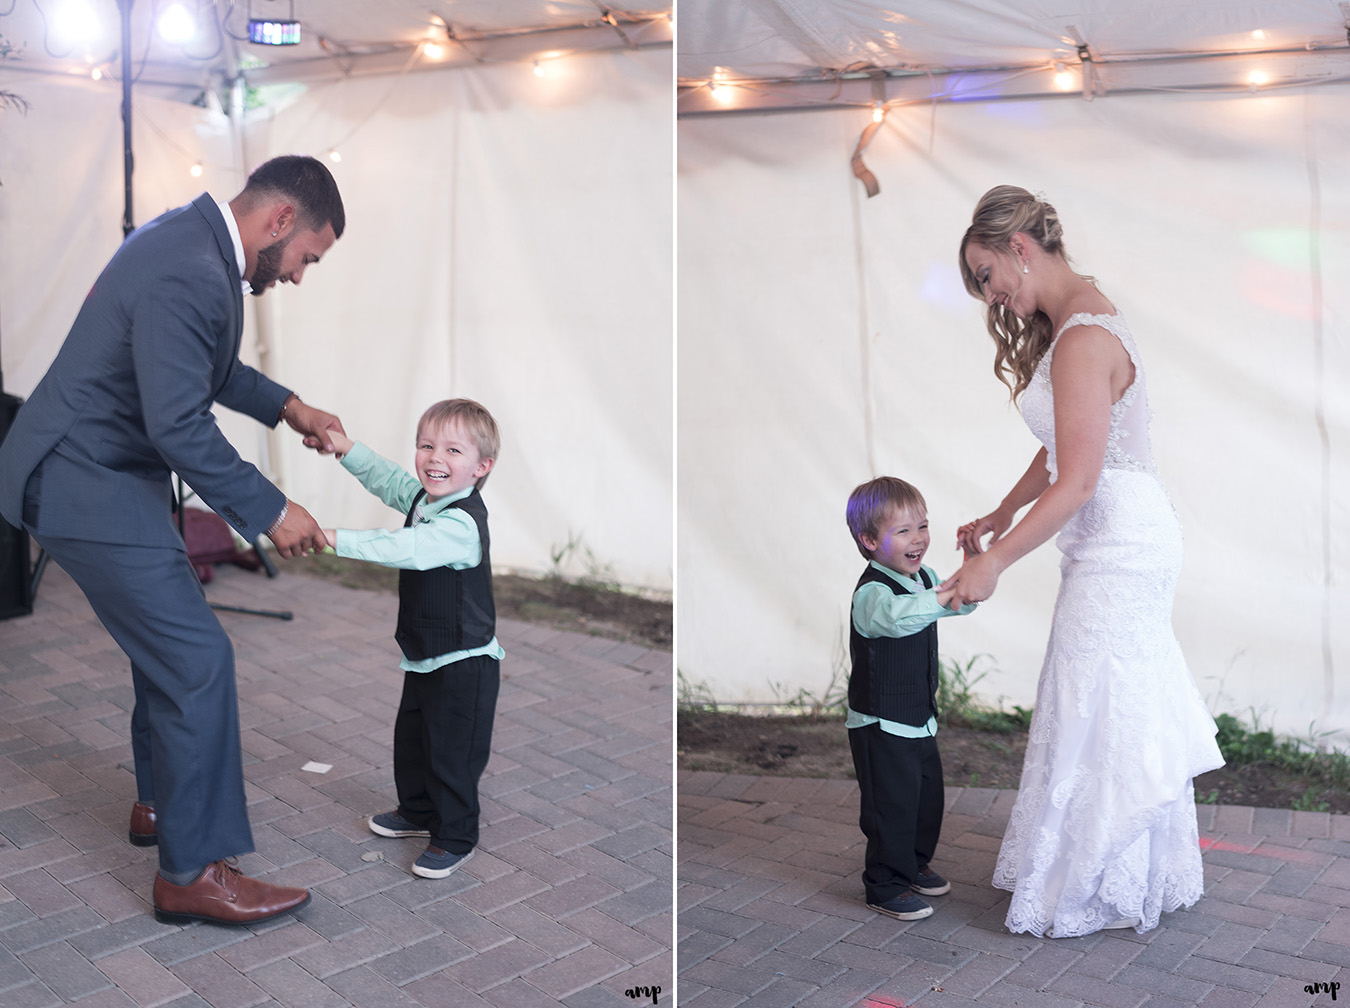 Bride and groom dance with a young guest